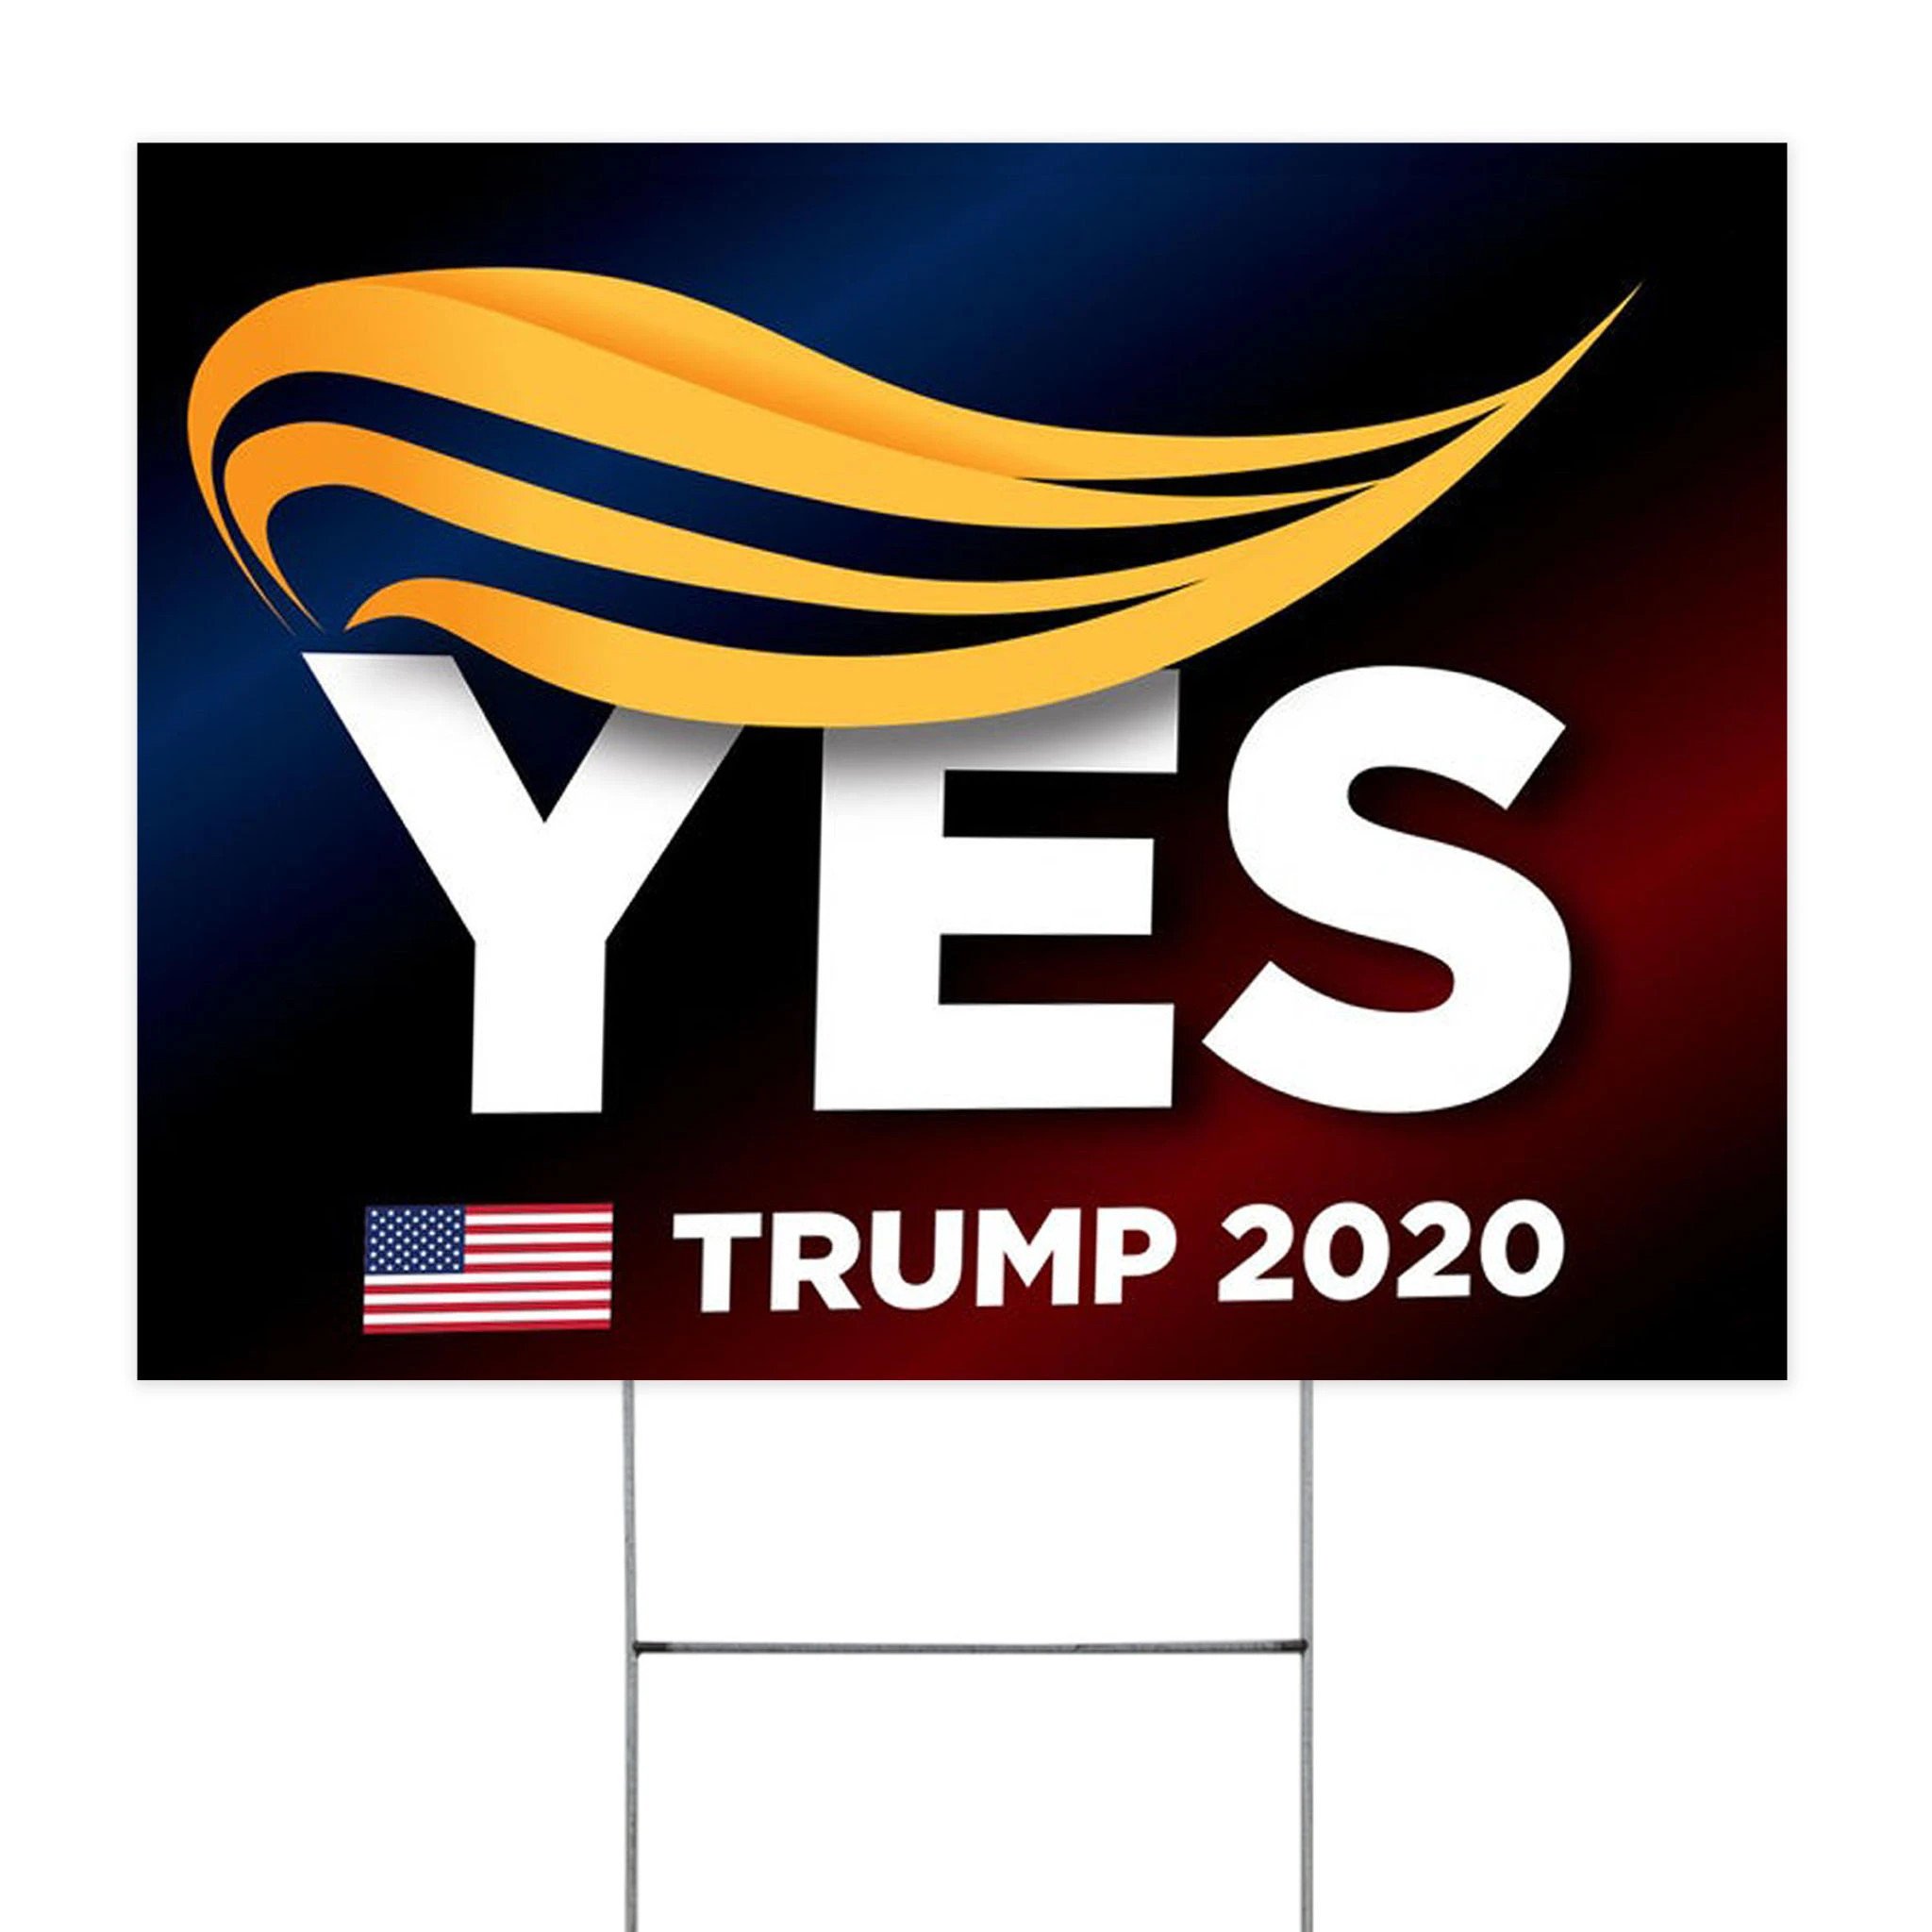 U.S Flag Yes Trump 2020 Yard Sign Republican Support Donald Trump Victory Campaign Outdoor Sign